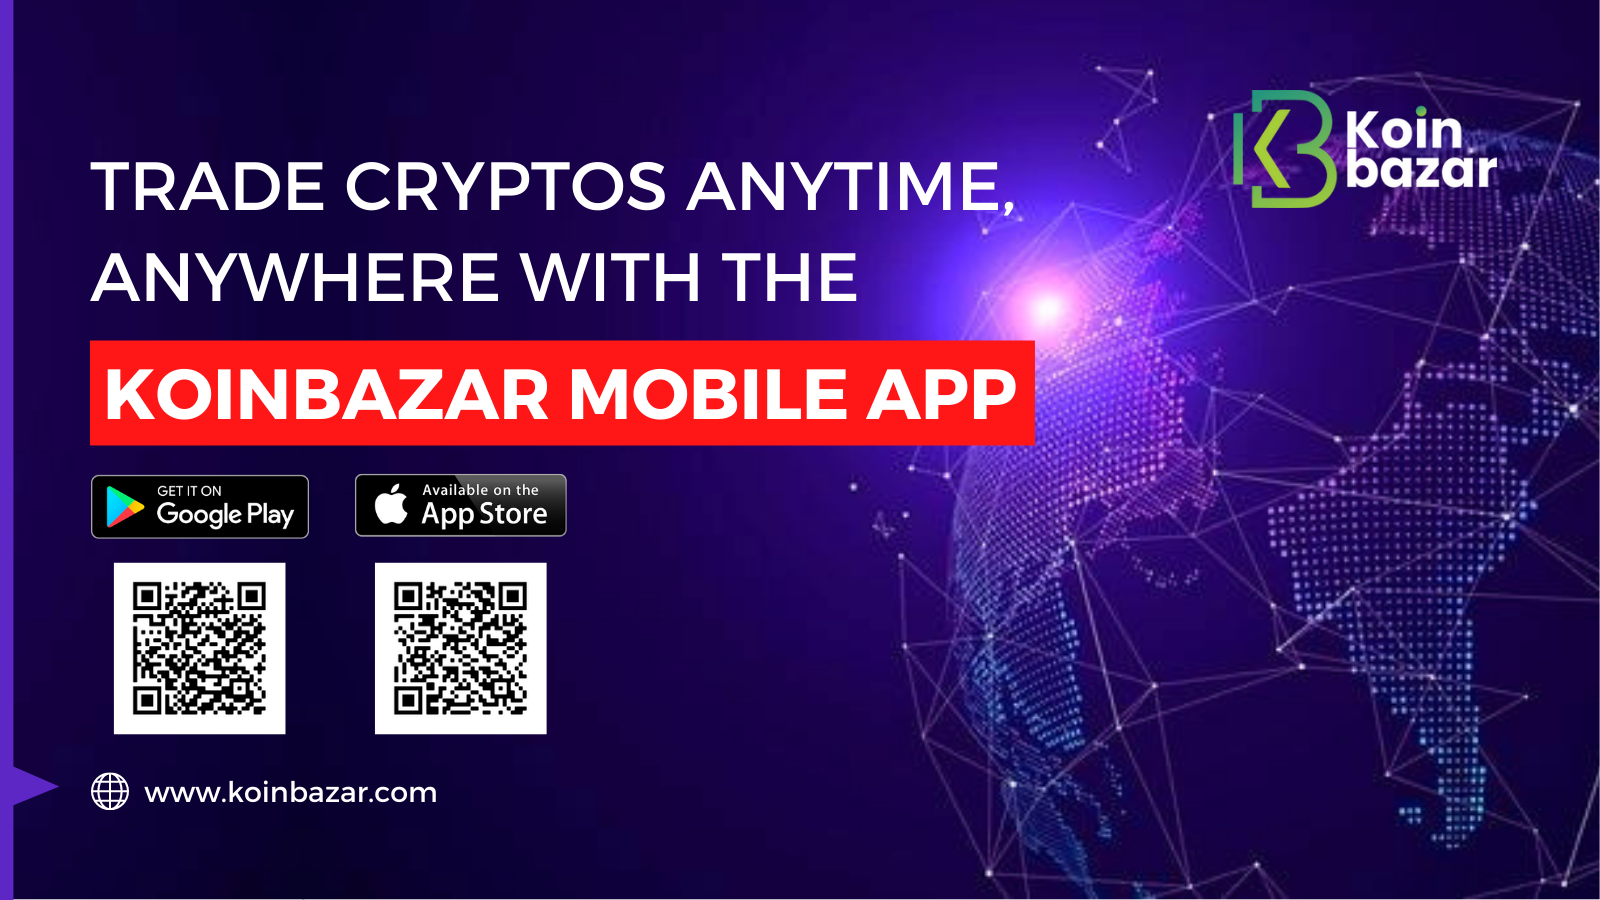 Article about Trade Cryptos Anytime, Anywhere with The Koinbazar Mobile App